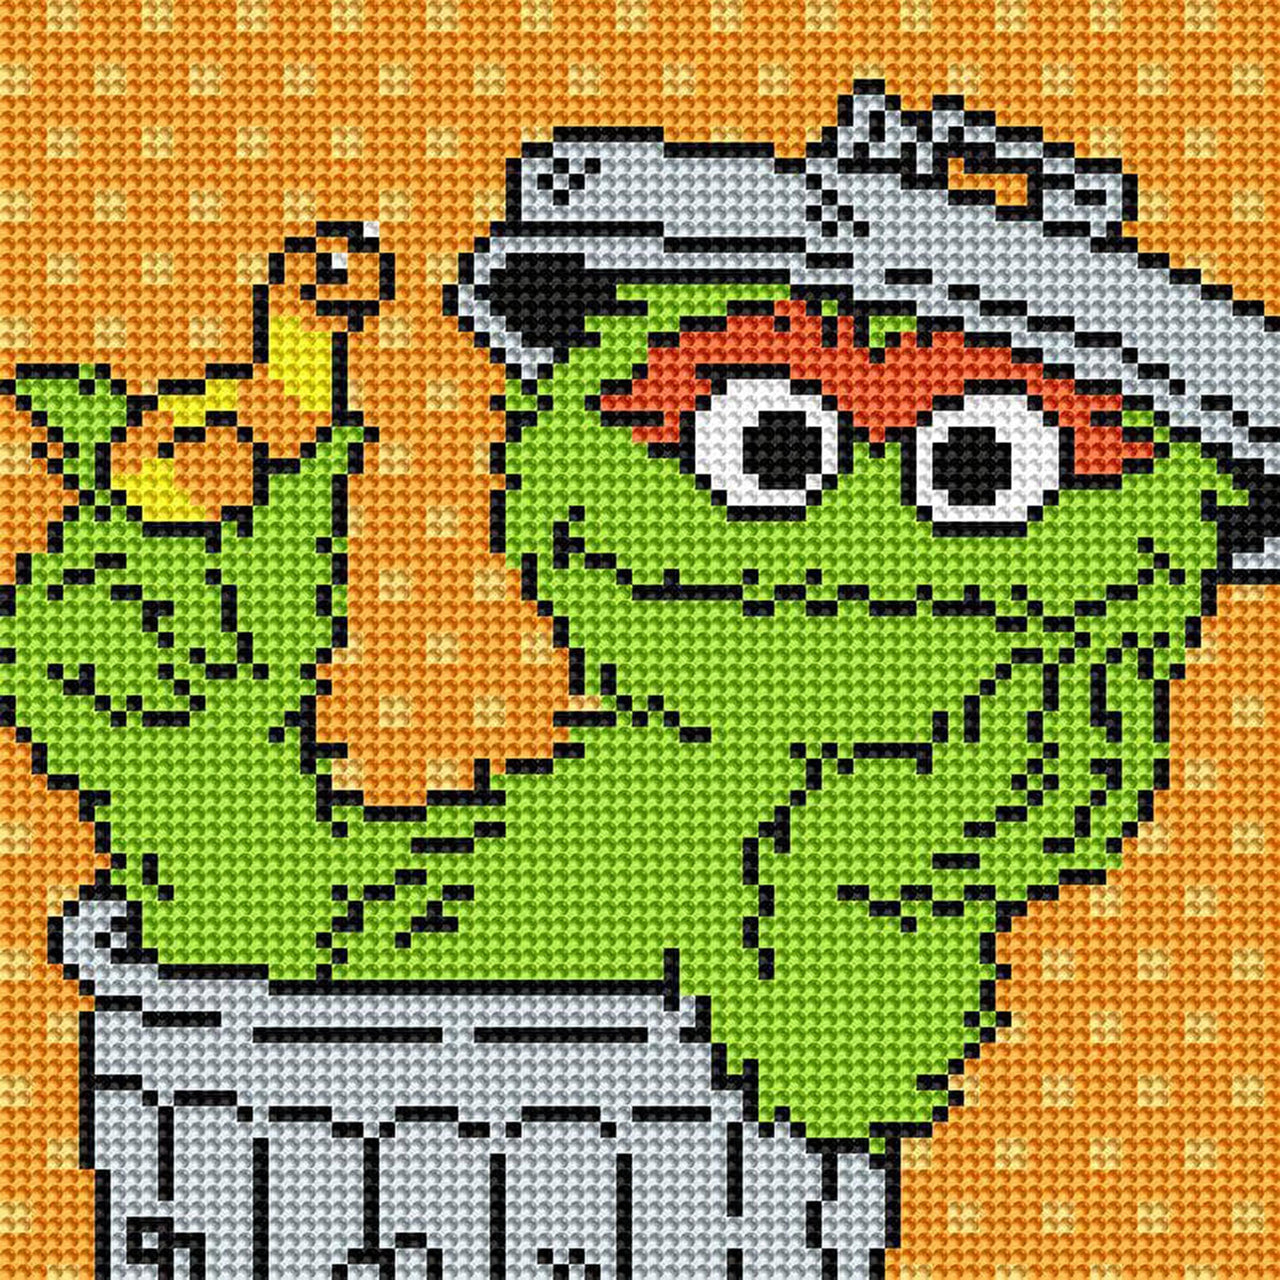 Diamond Painting Oscar the Grouch™ Portrait 9" x 9" (23cm x 23cm) / Round with 9 Colors including 2 ABs / 6,561